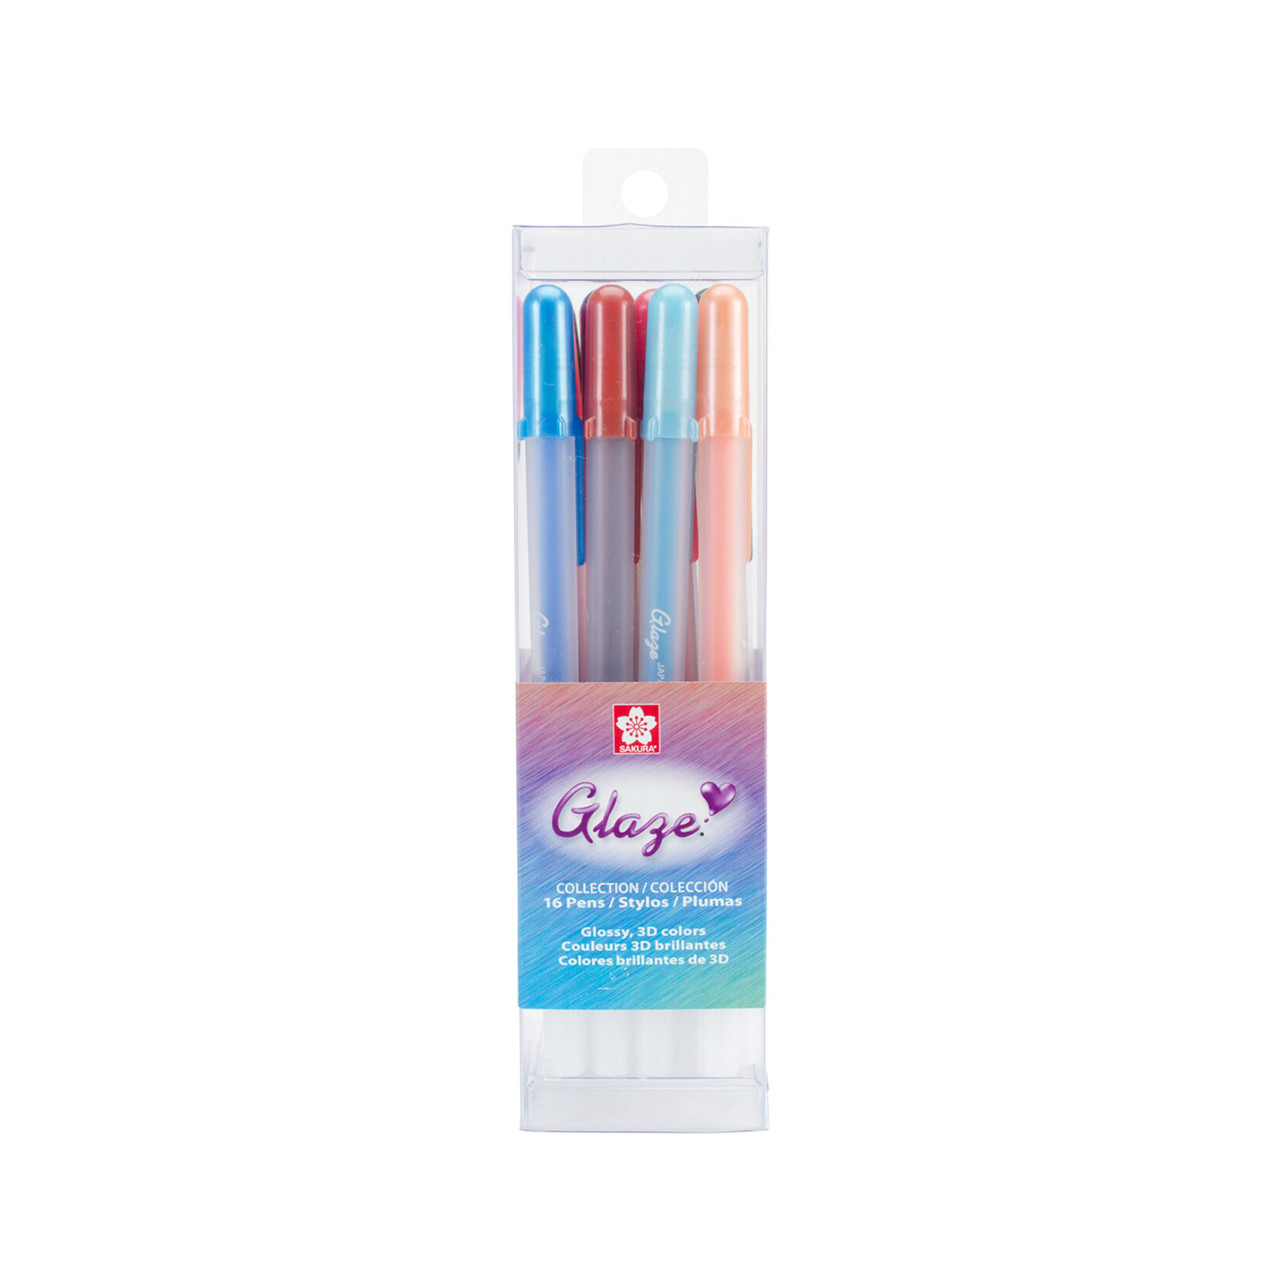 Shanos 3D Jelly Pens, Shanos Jelly Roll Pens, 3D Jelly Penset for Coloring